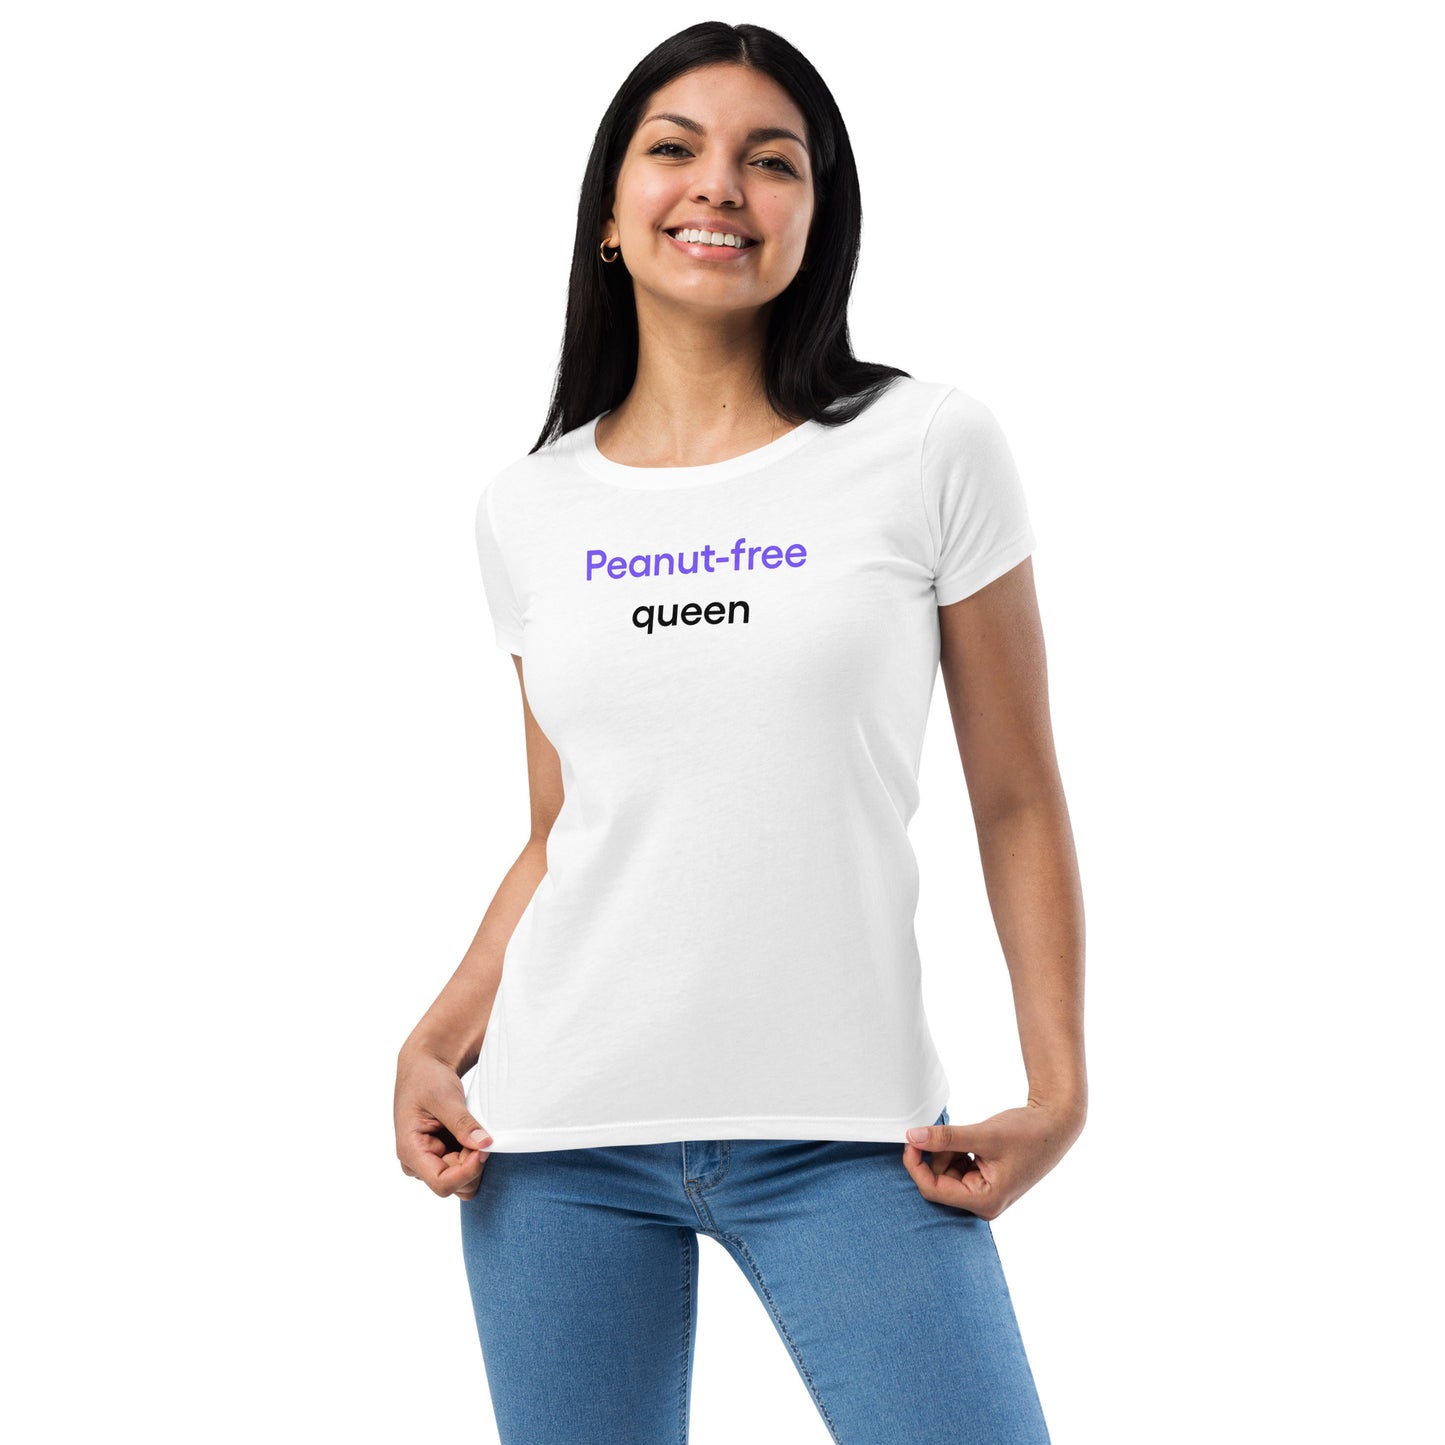 Peanut-free queen | Women’s fitted t-shirt